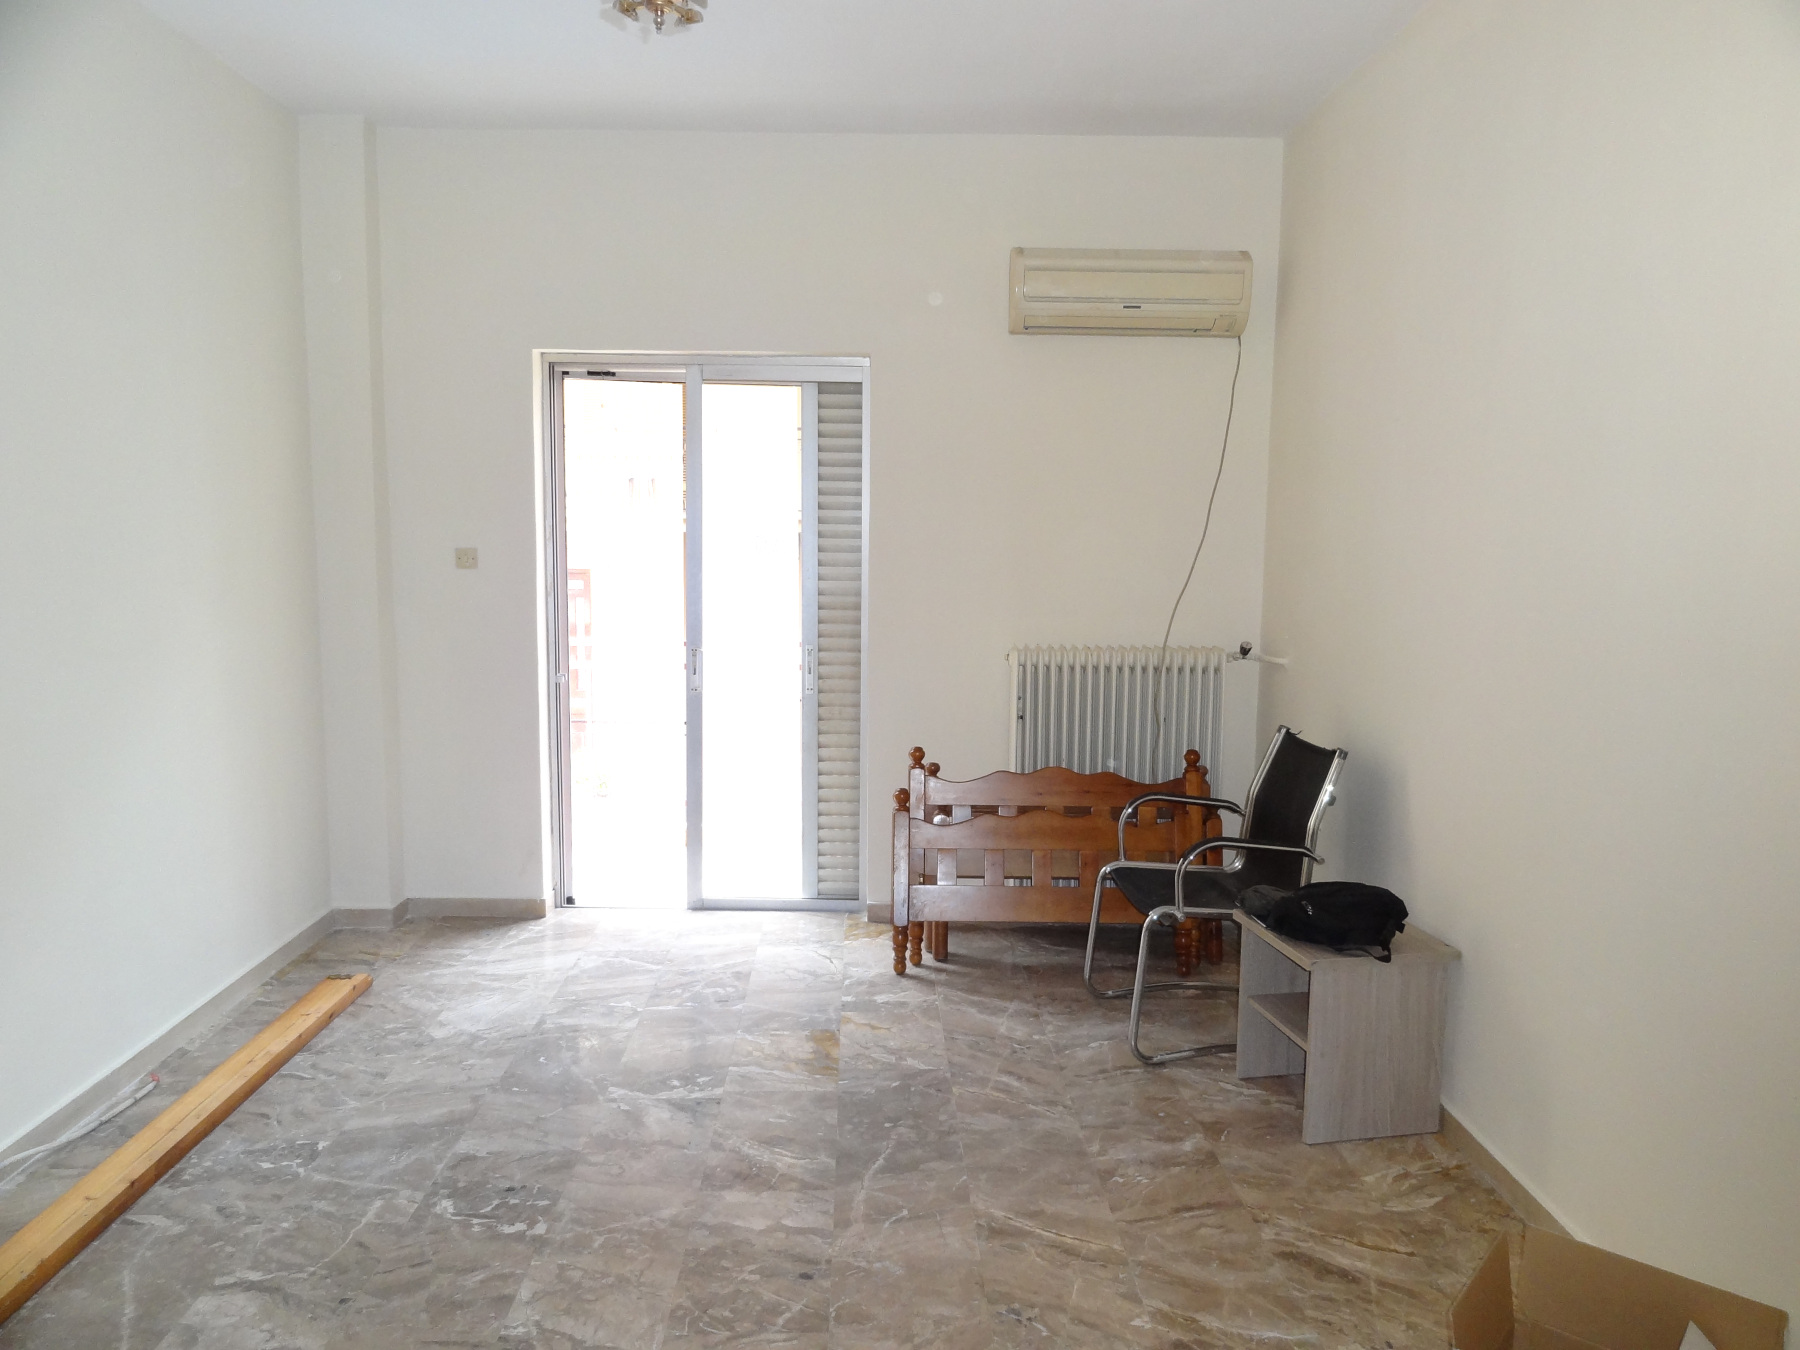 For rent, under renovation, a bright 2 bedrooms apartment of 65 sq.m. mezzanine in the Lakkoma area in Ioannina